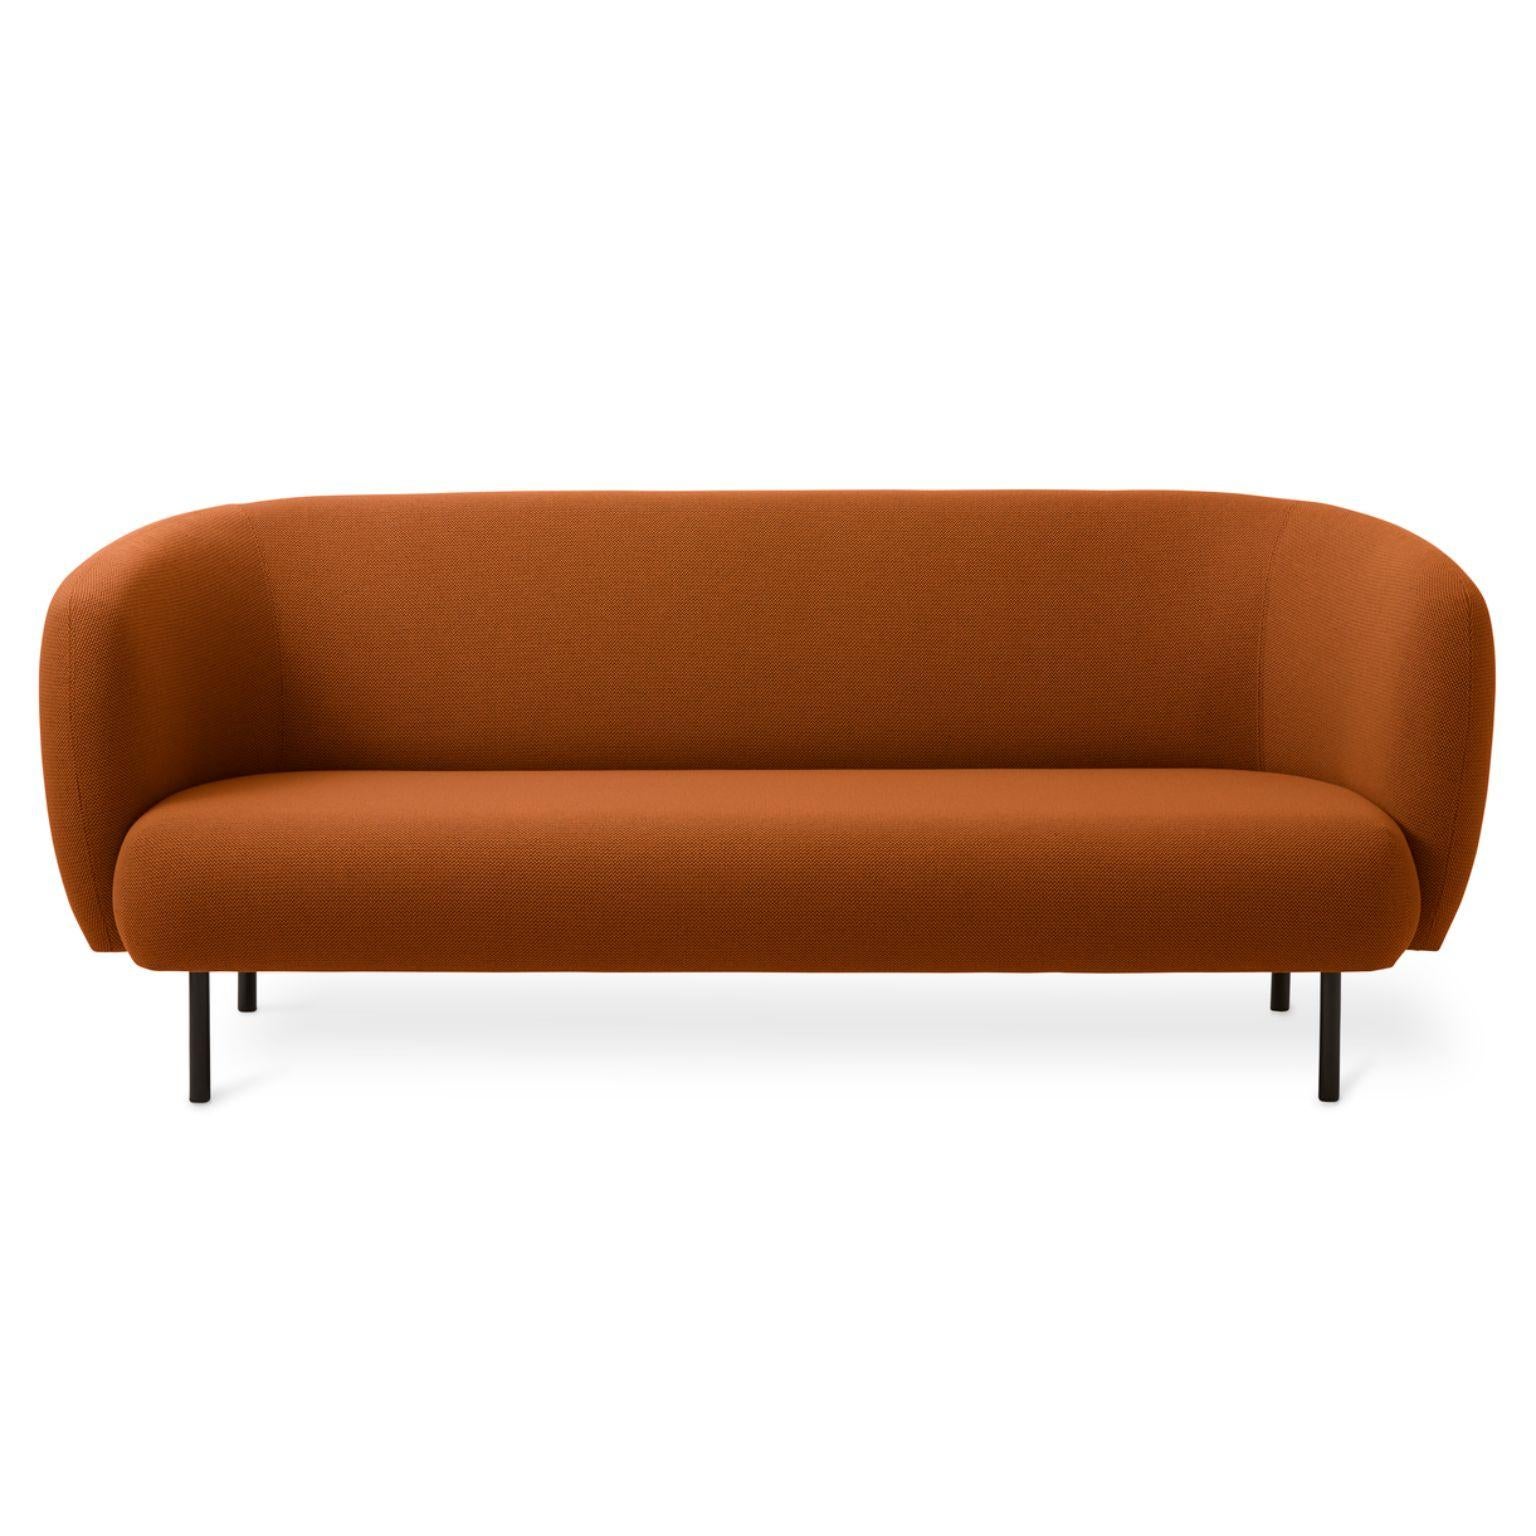 Caper 3 seater terracotta by Warm Nordic
Dimensions: D206 x W84 x H 63 cm
Material: Textile upholstery, Wooden frame, Powder coated black steel legs.
Weight: 55.5 kg
Also available in different colours and finishes. 

An elegant sofa with an